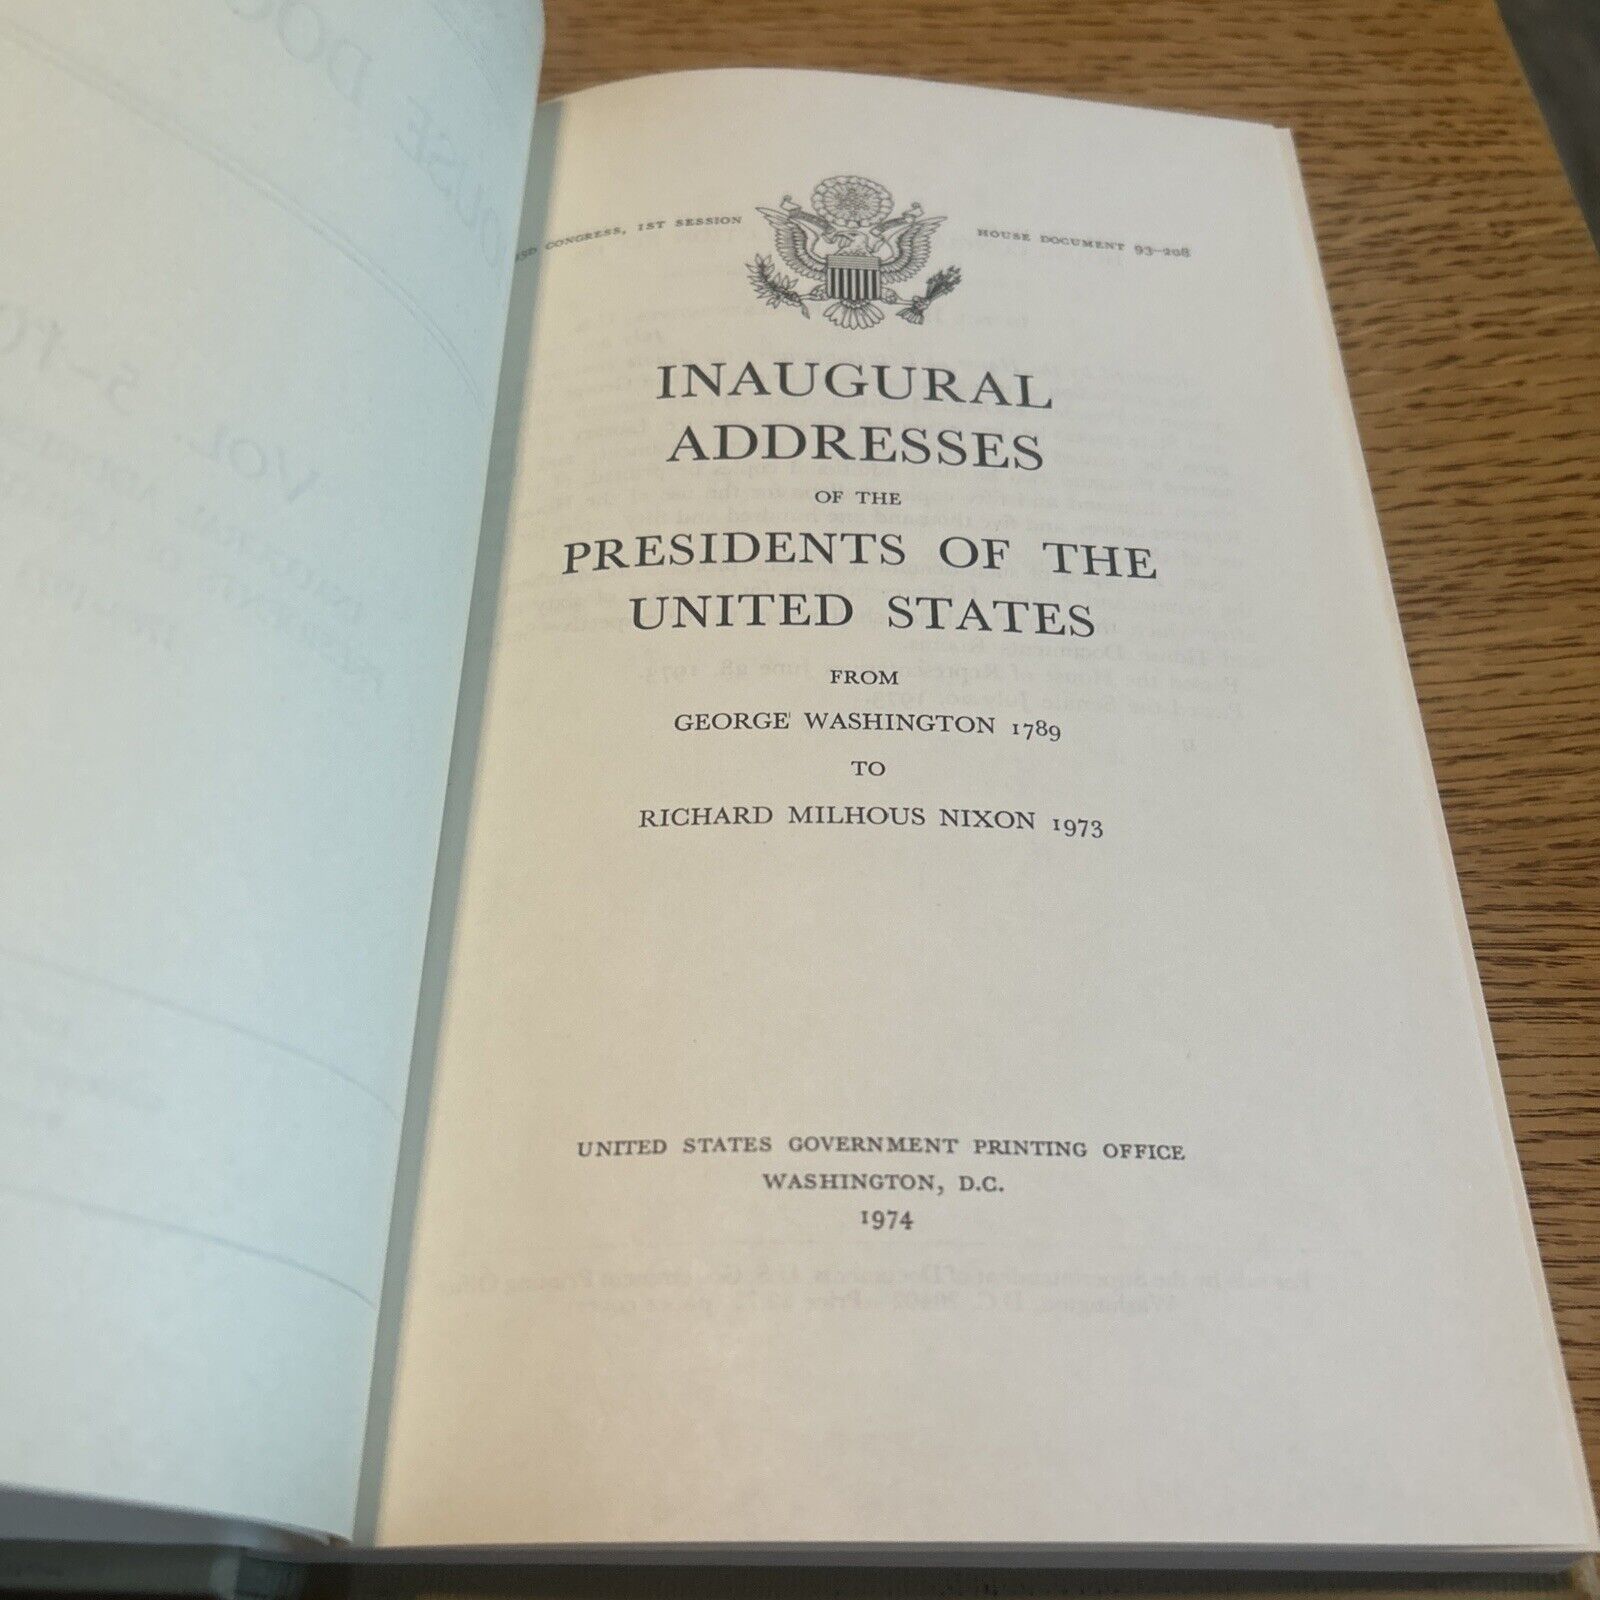 Inaugural Addresses Of The Presidents Of The United States 1789-1961 Hard Cover